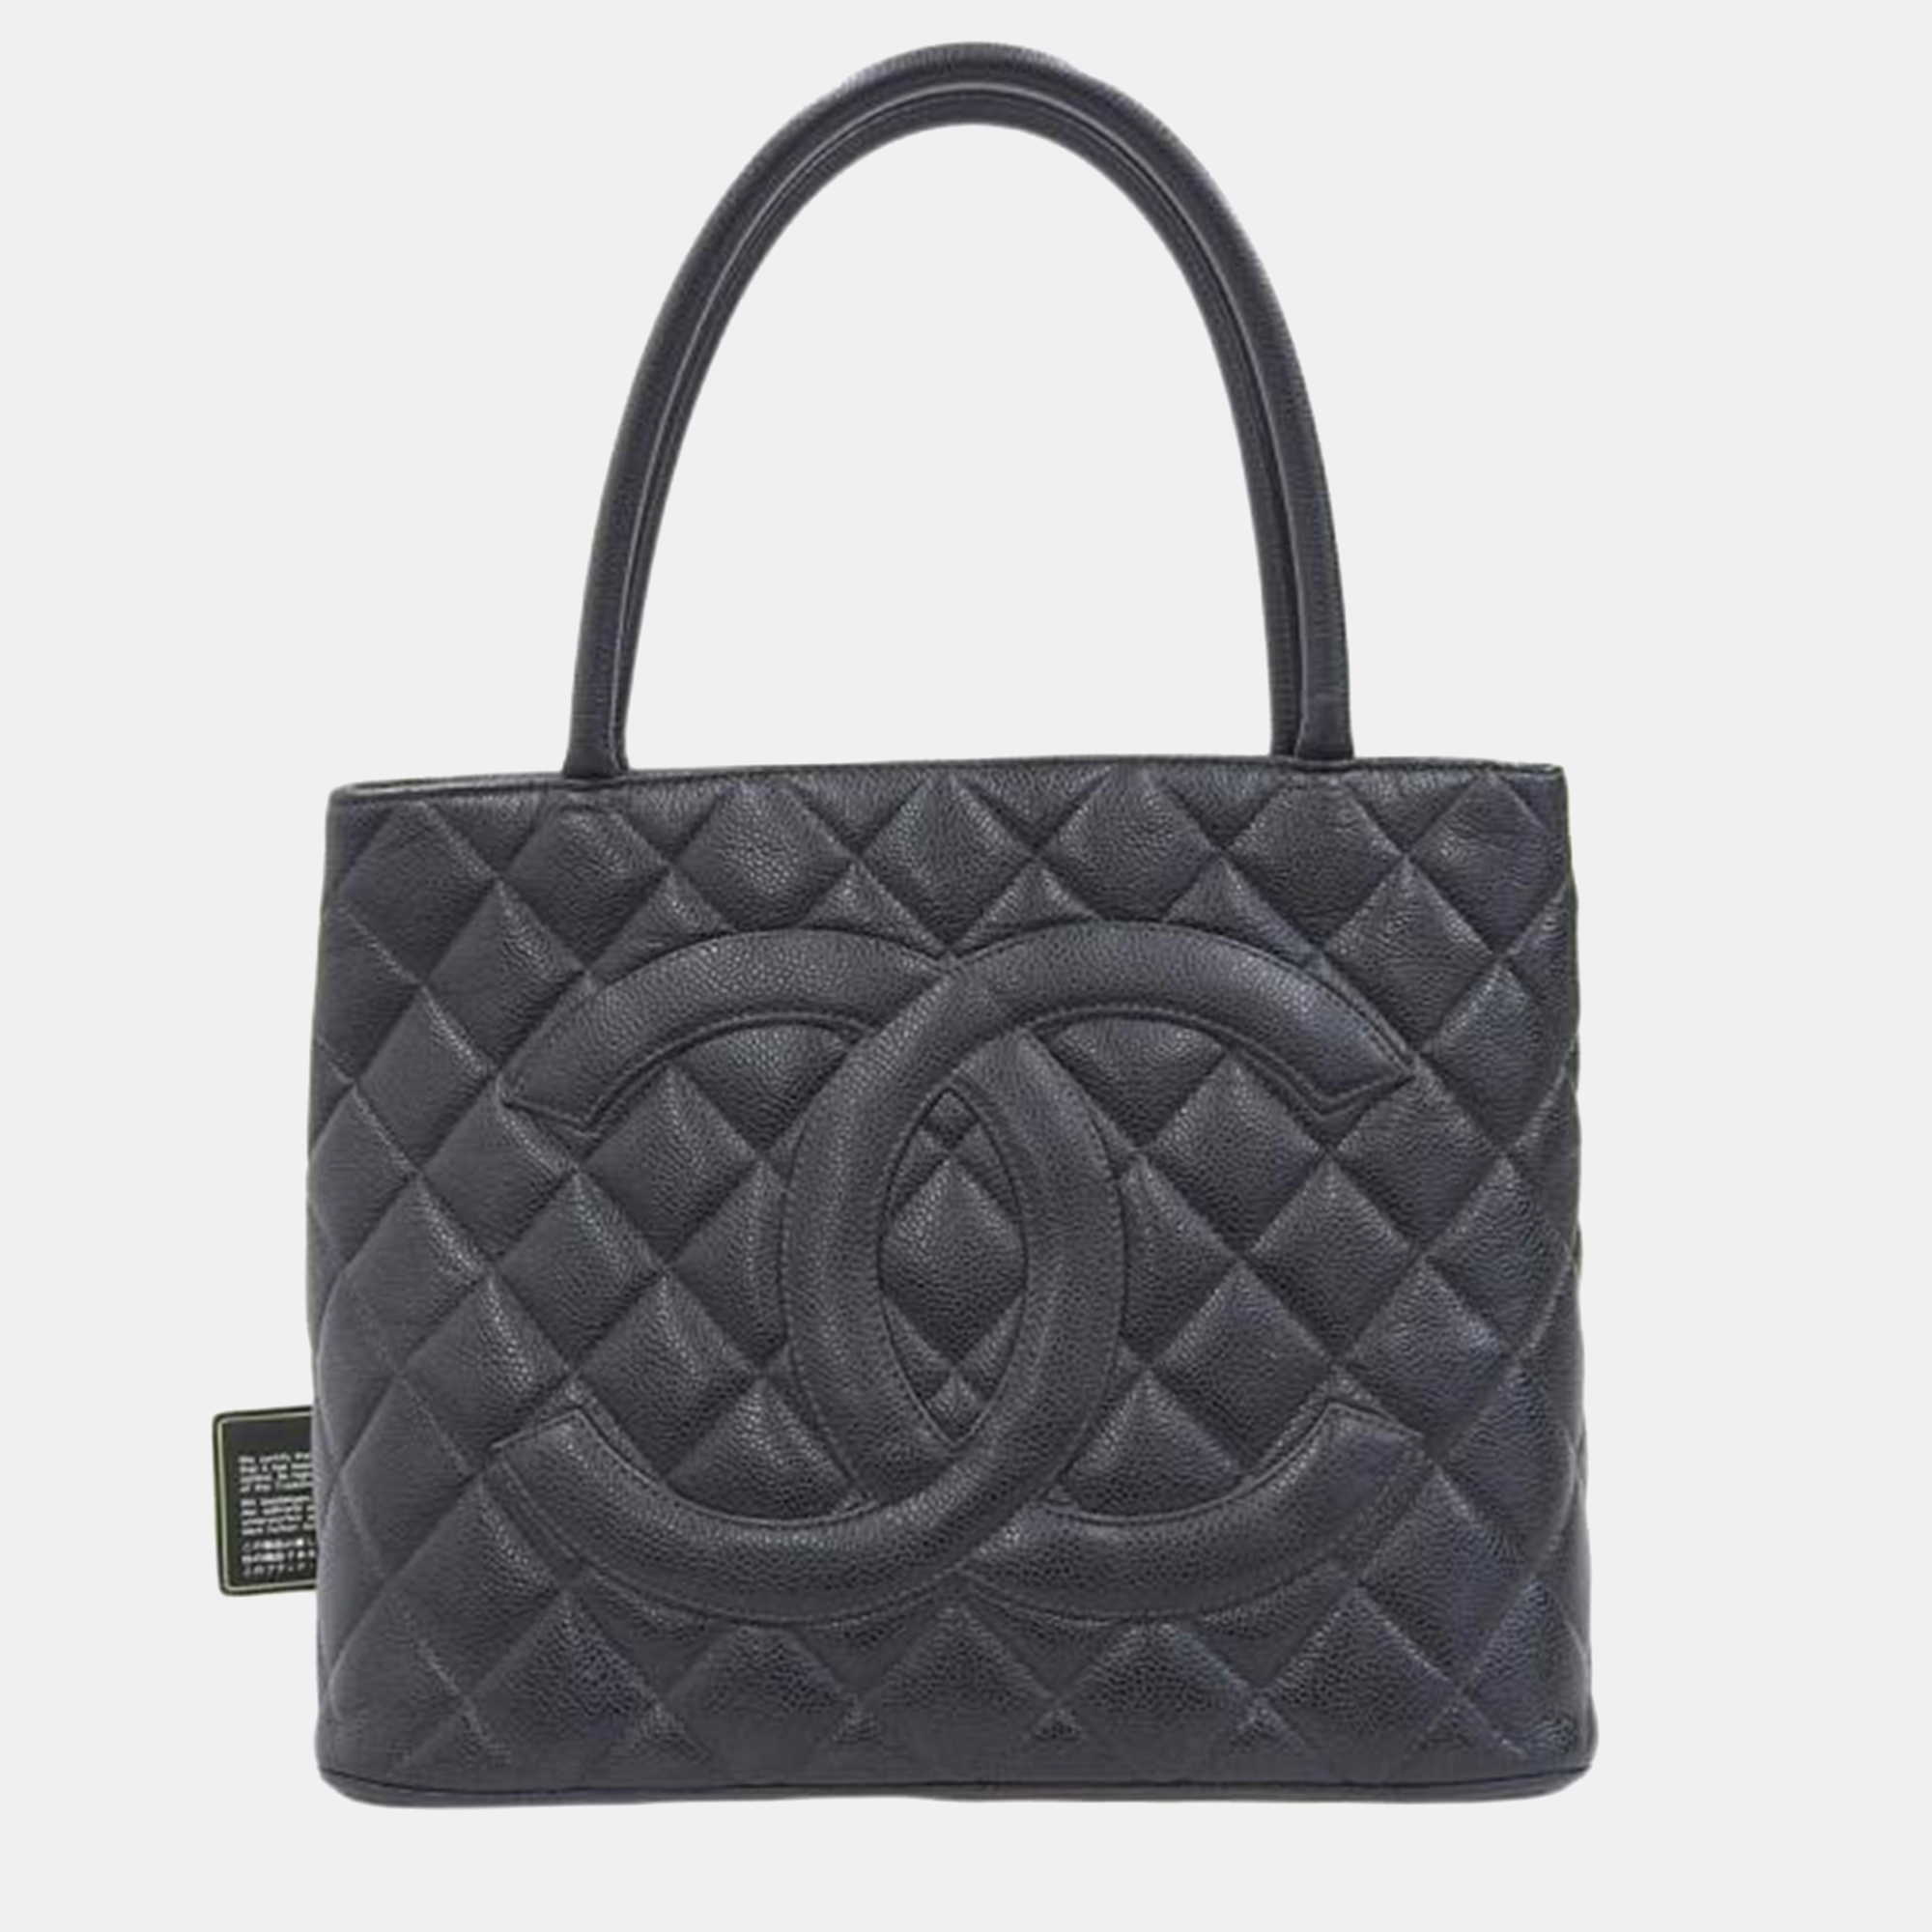 Pre-owned Chanel Black Leather Cc Caviar Medallion Tote Bag